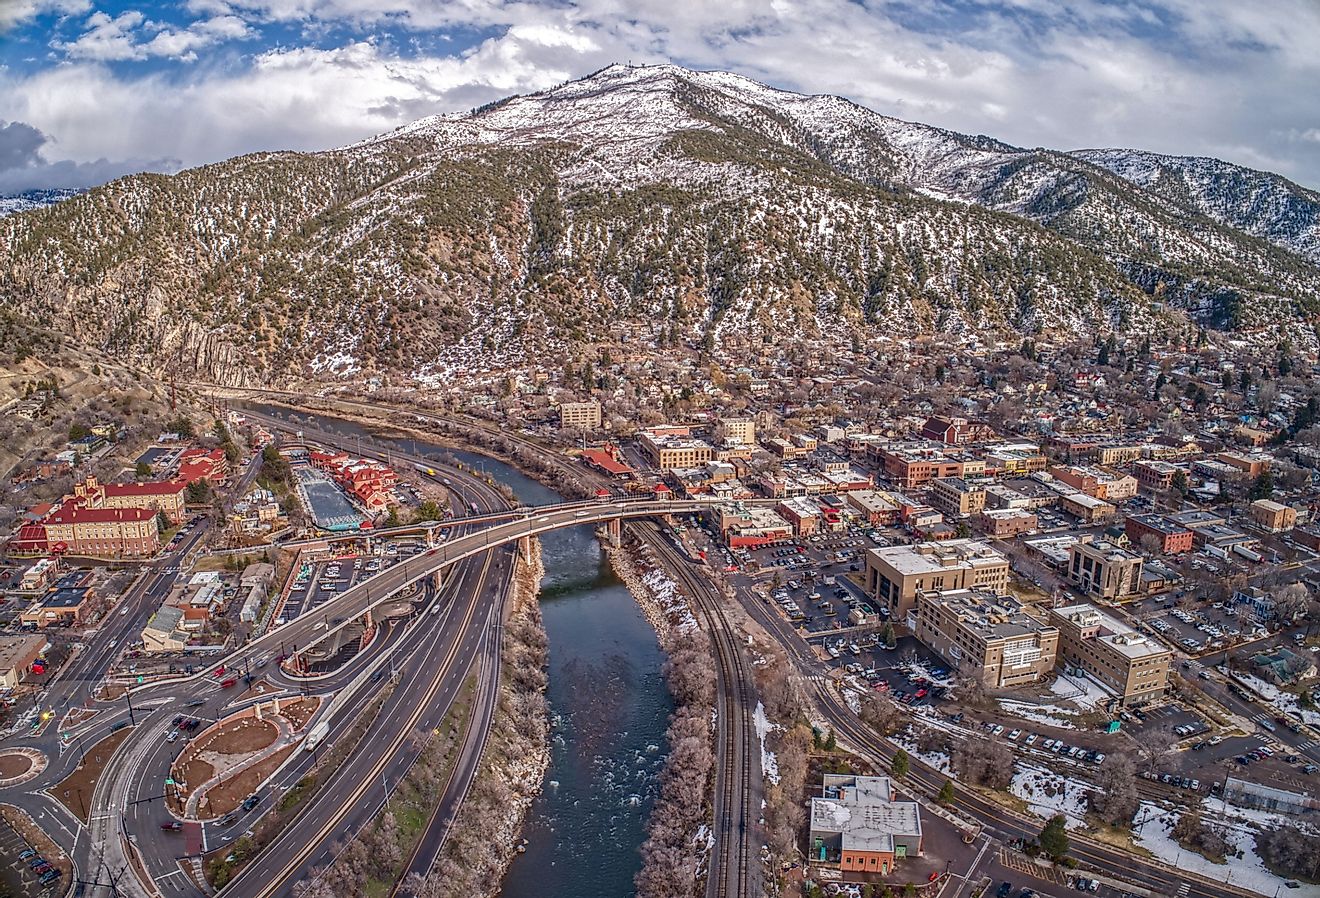 Aerial view of Glenwood Springs, a community in the mountains where two rivers meet. 